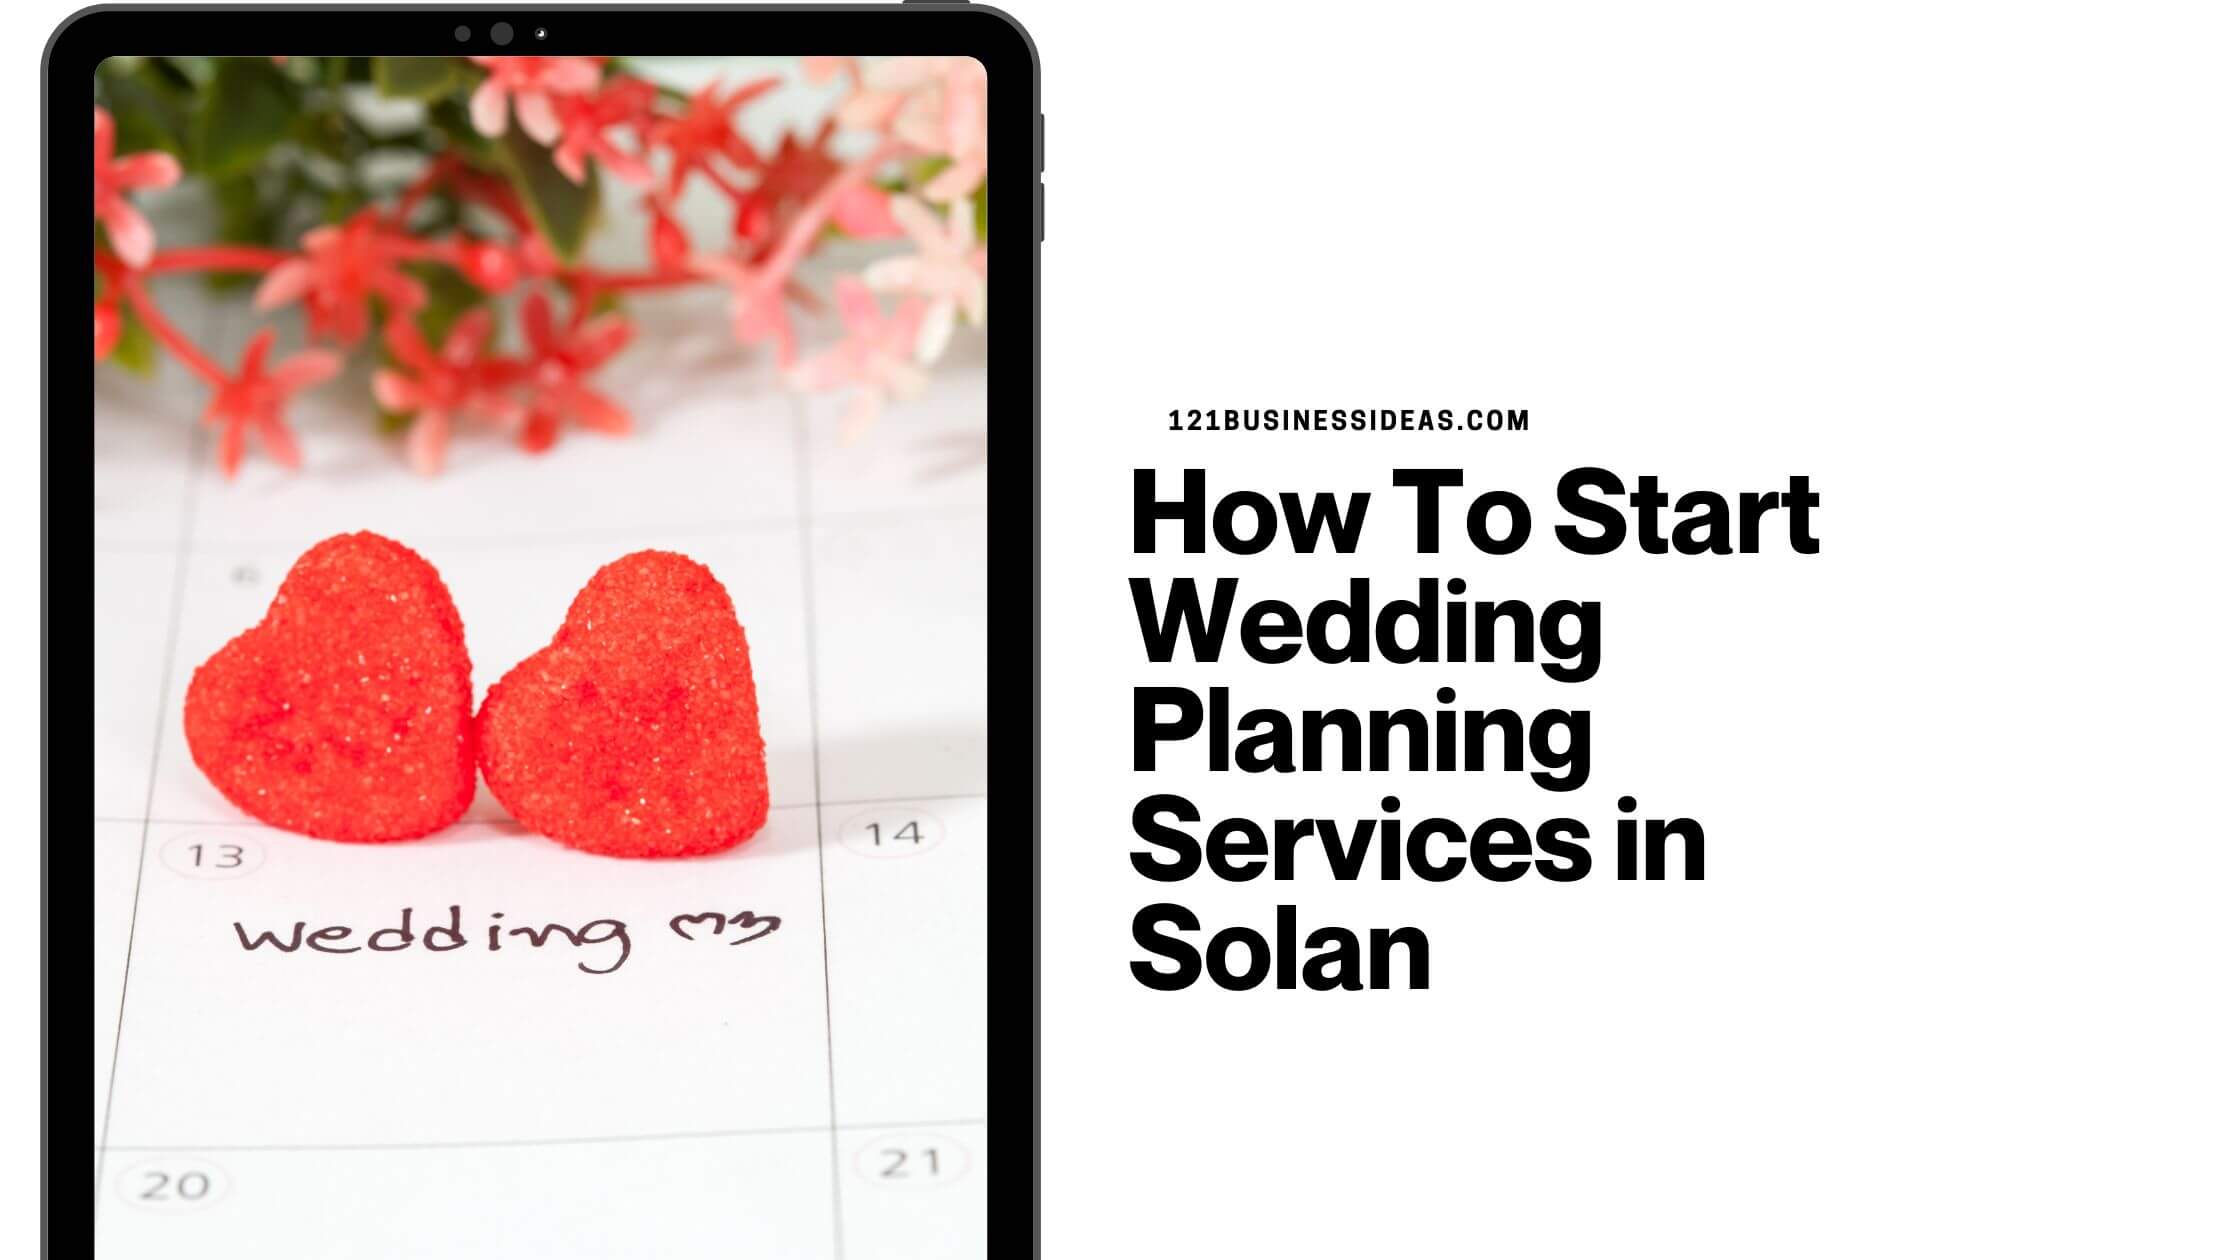 How To Start Wedding Planning Services in Solan (1)